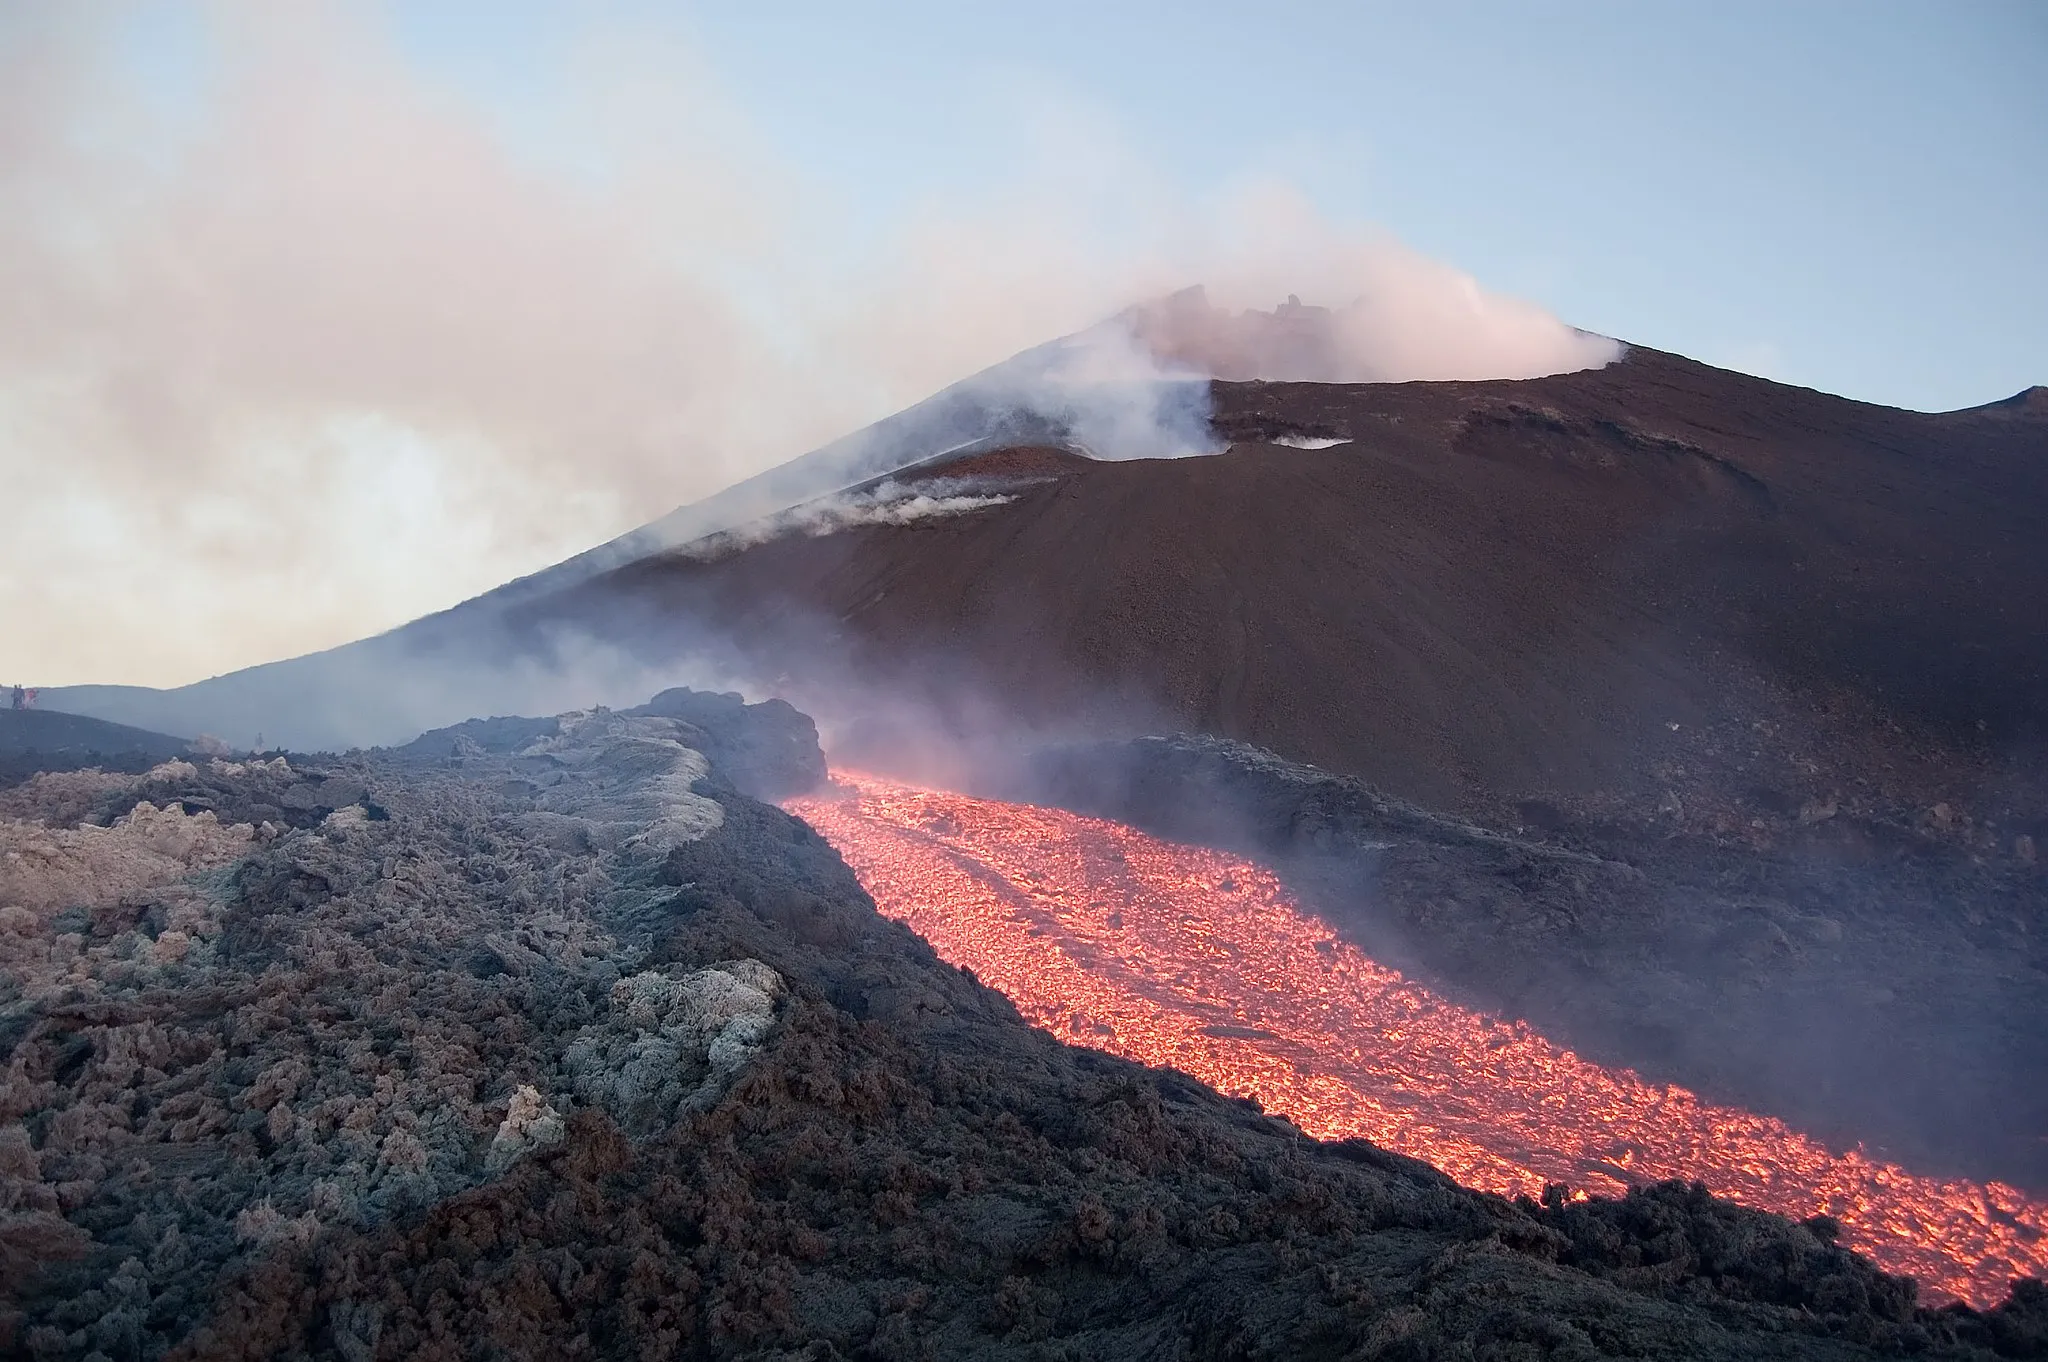 Photo showing: Volcano Etna (Sicily, Italy) during an eruption